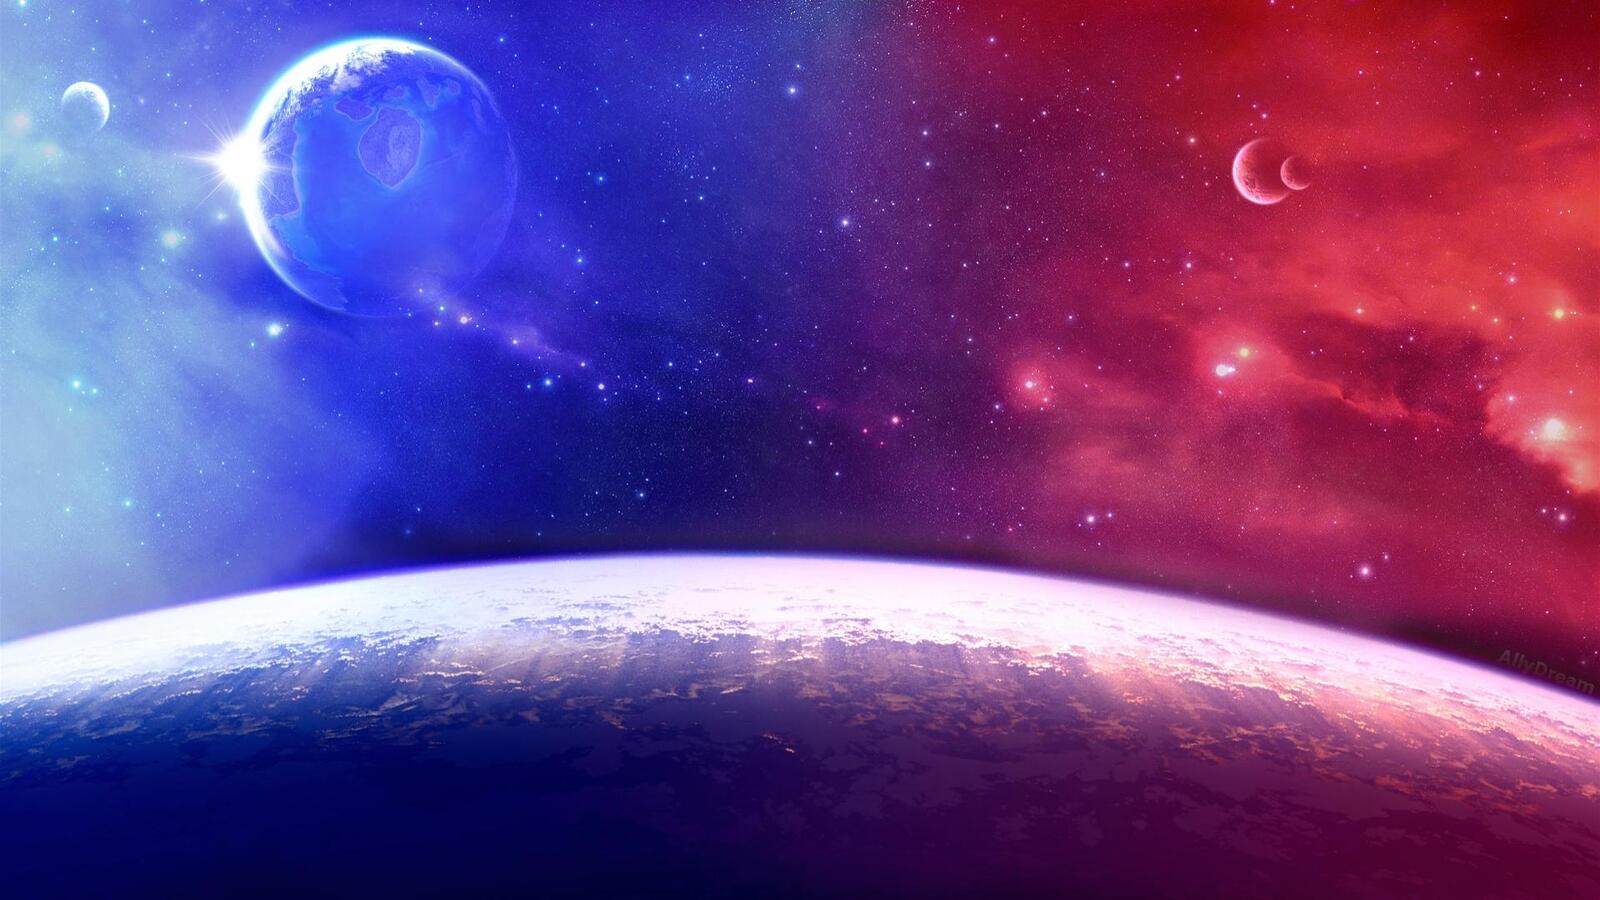 Wallpapers space blue red on the desktop